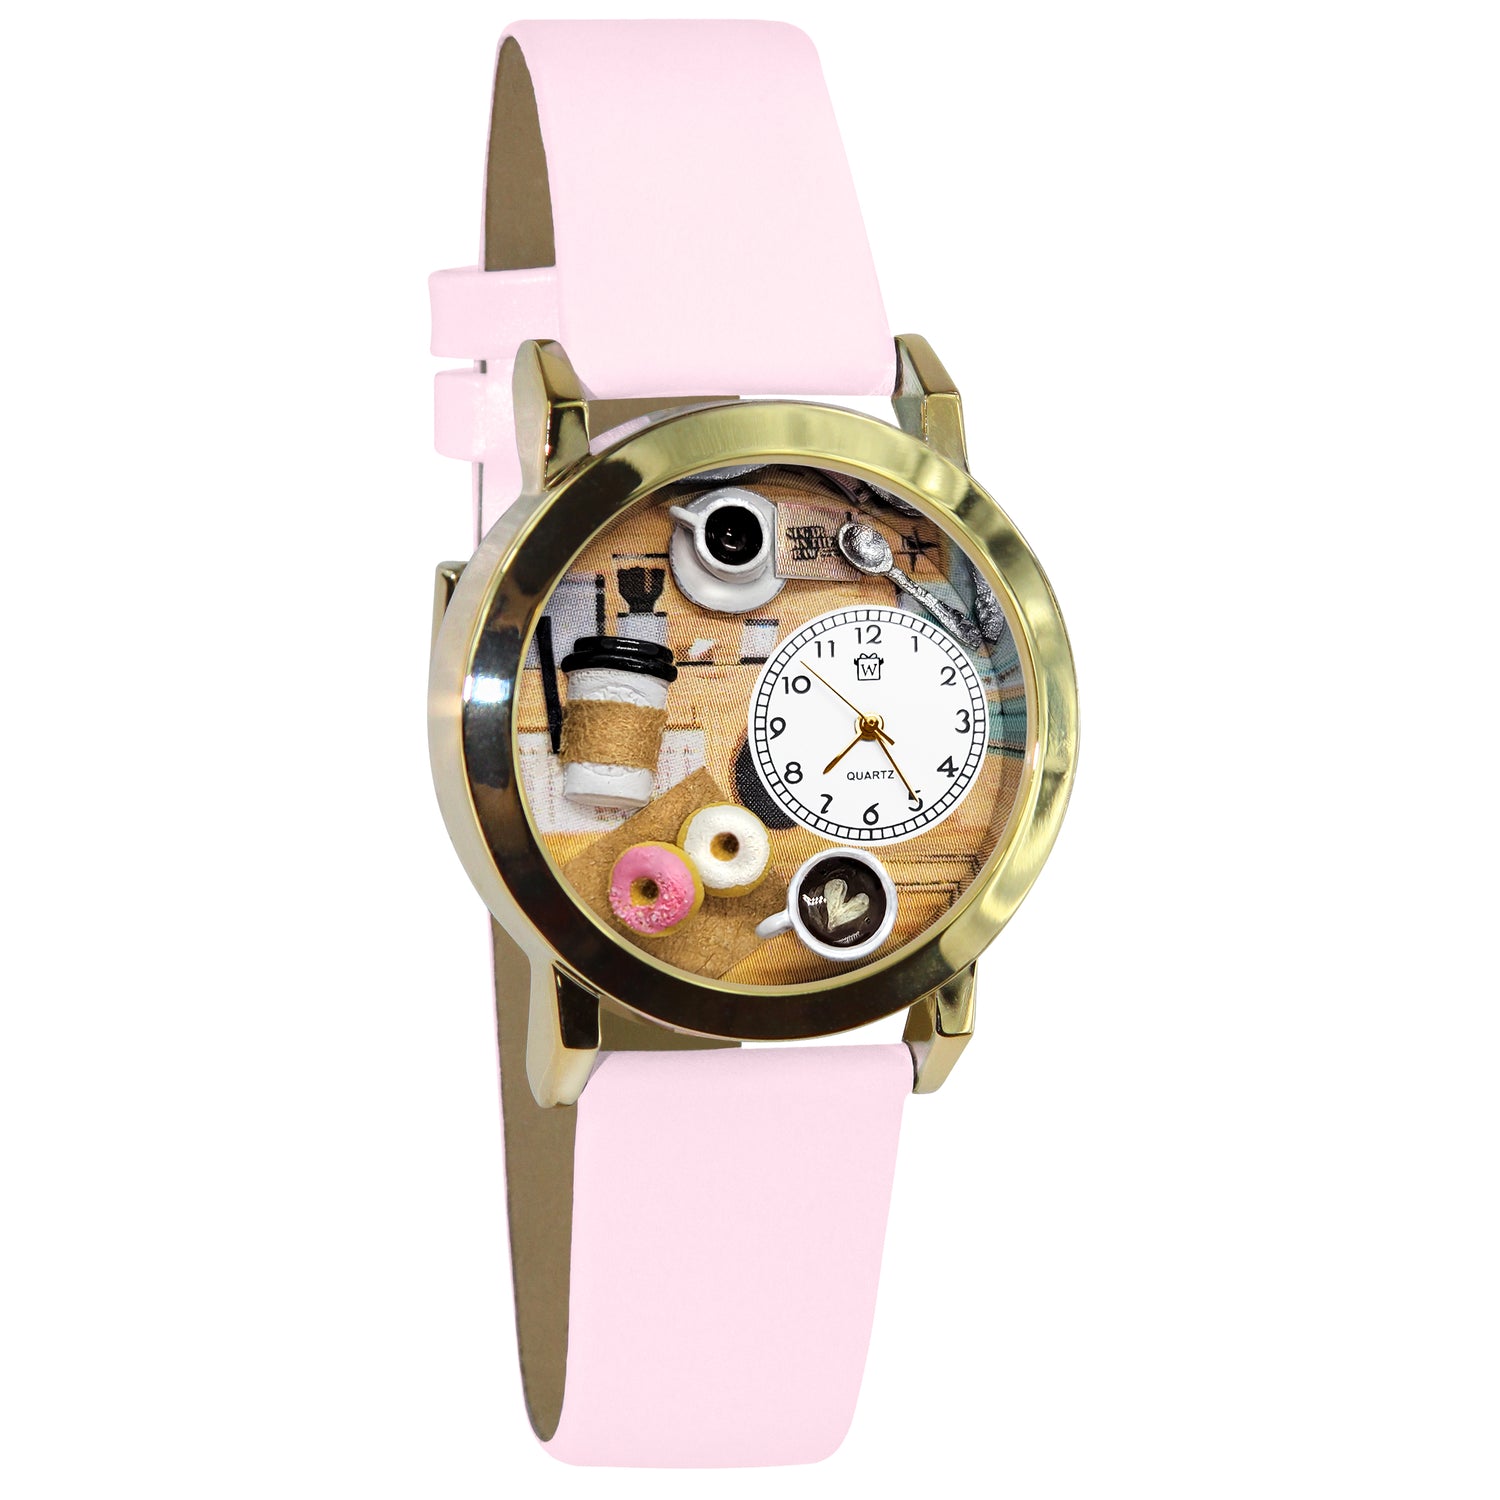 Whimsical Gifts | Coffee Lover 3D Watch Small Style | Handmade in USA | Hobbies & Special Interests | Food & Wine | Novelty Unique Fun Miniatures Gift | Gold Finish Pink Leather Watch Band